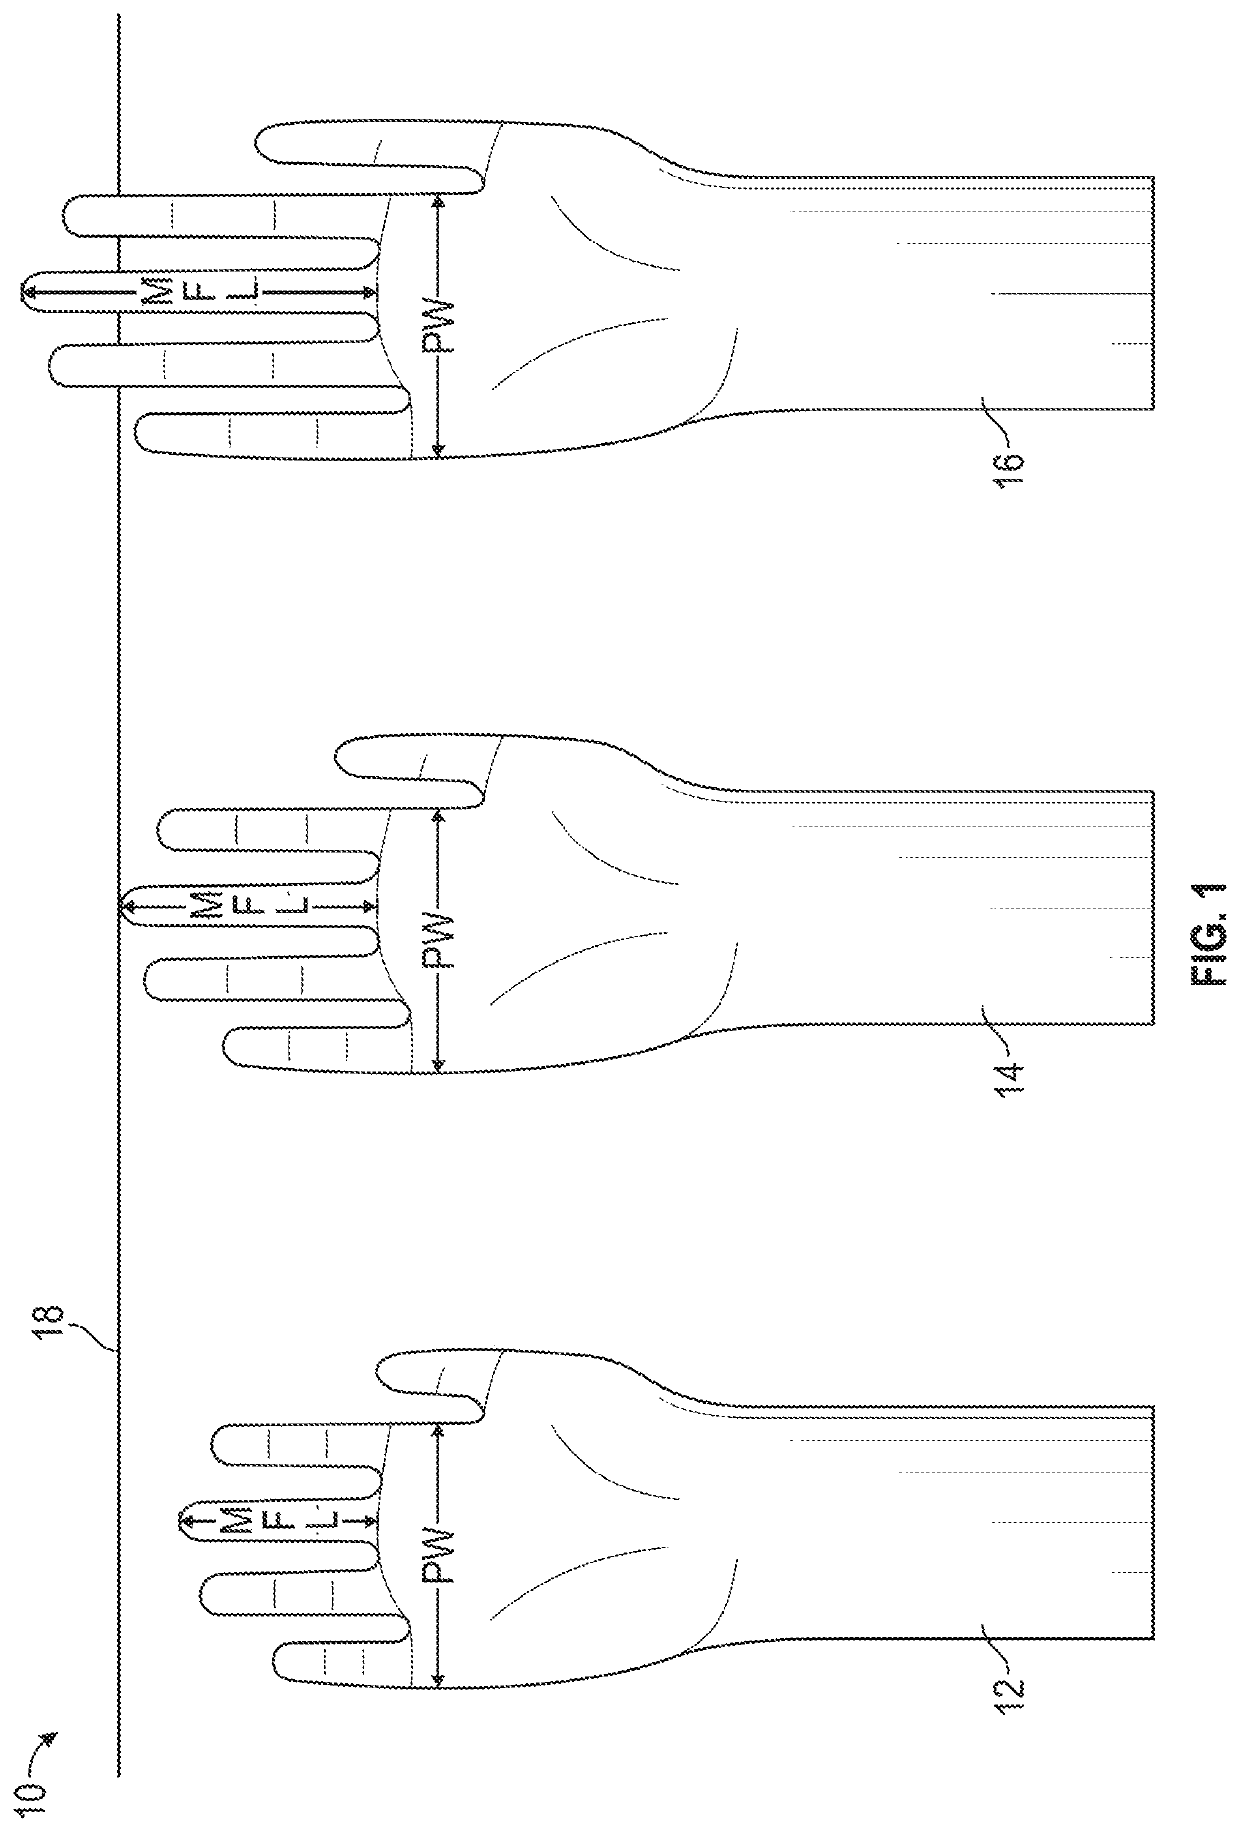 Protective Gloves with Improved Fingertip Fitment and Methods and Mold-Forms for Manufacturing Such Gloves